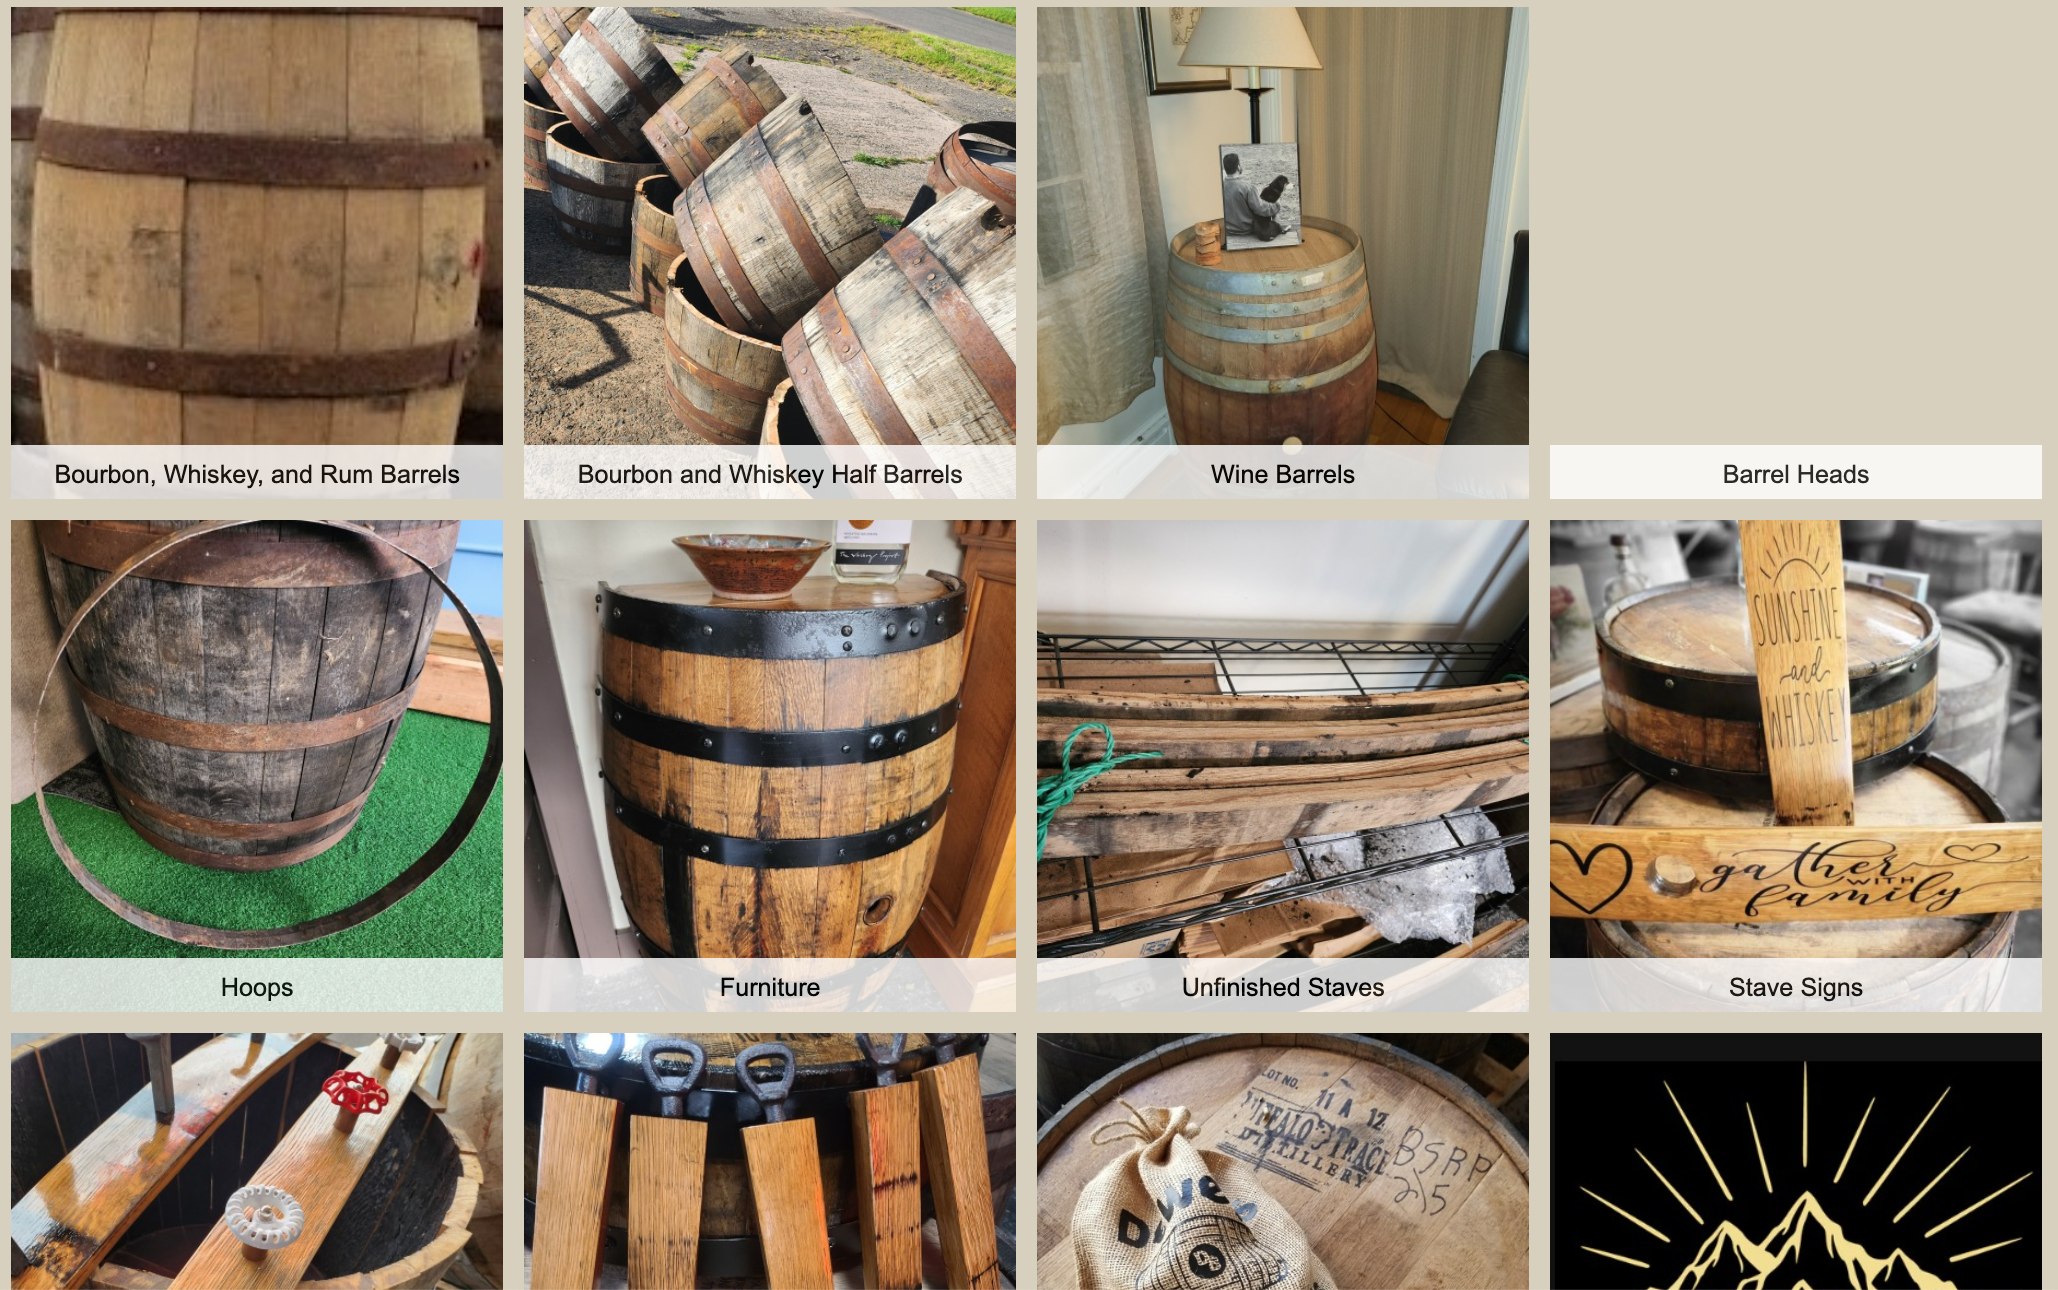 products available at Dewey's barrels including furniture, staves, home decor, signs, wood chunks and more